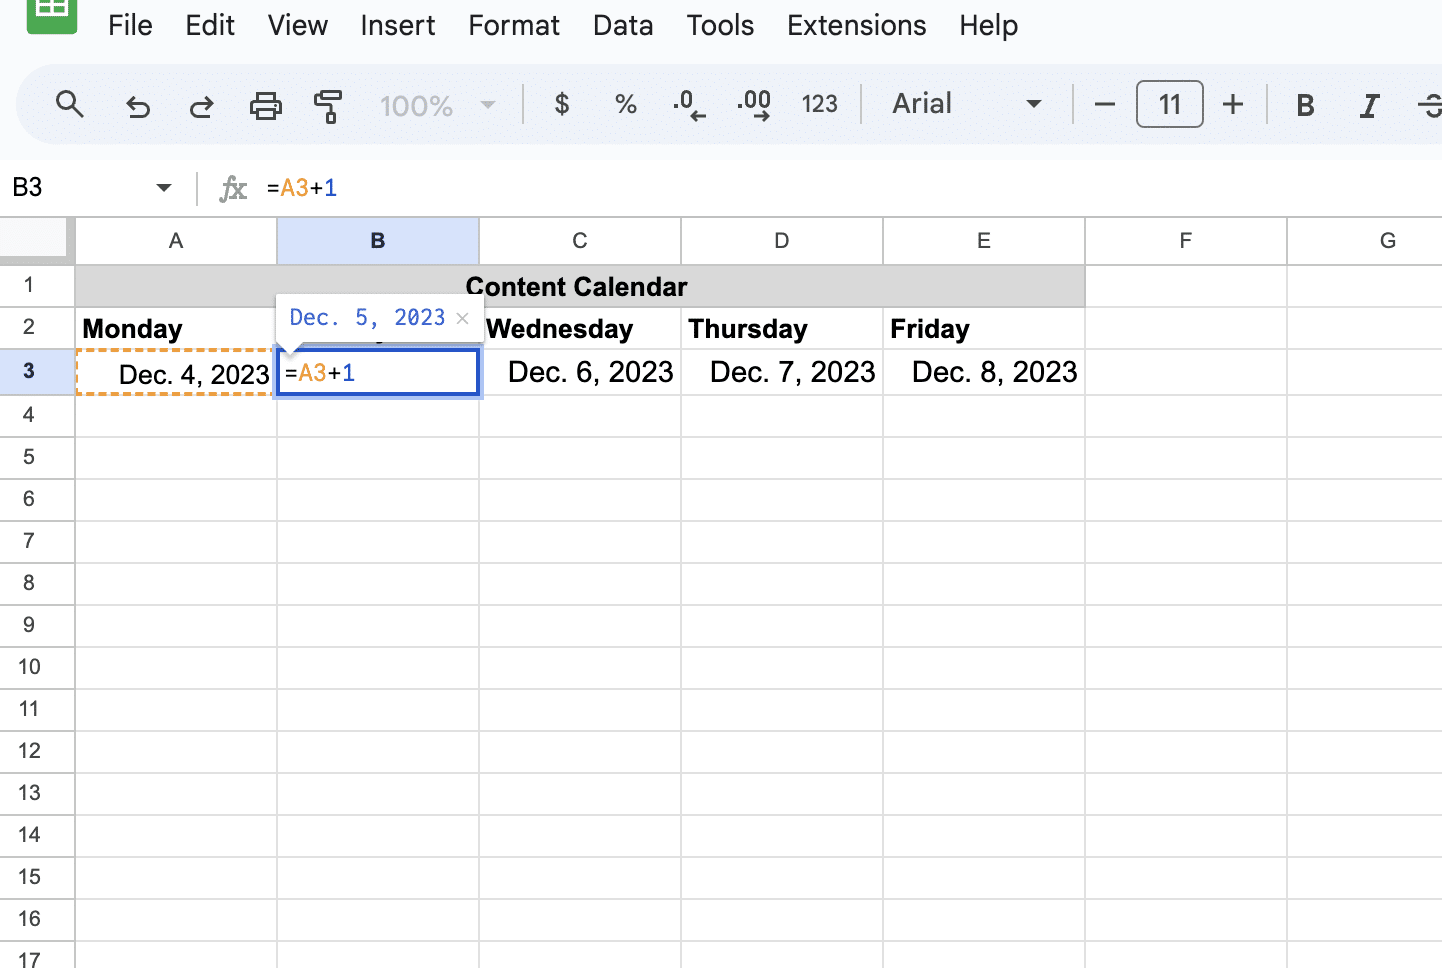 Using formulas to populate dates in the calendar.